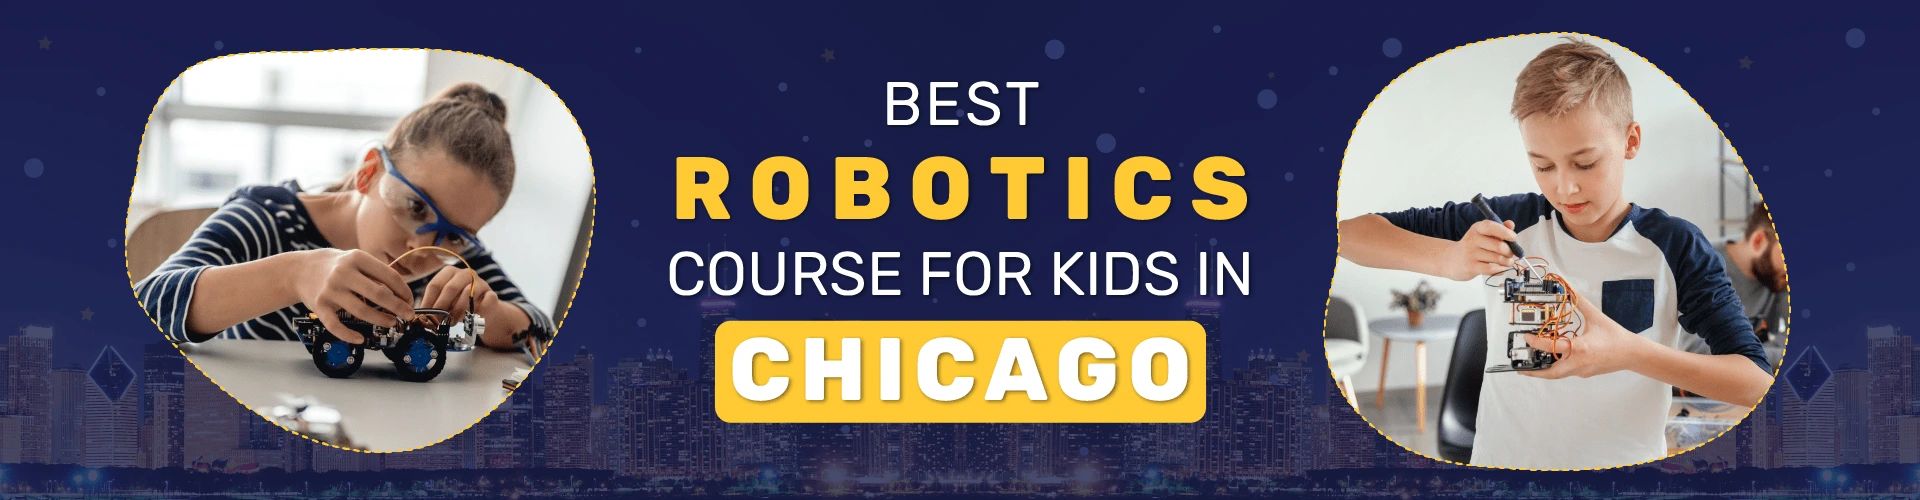 Robotics Course For Kids In Chicago